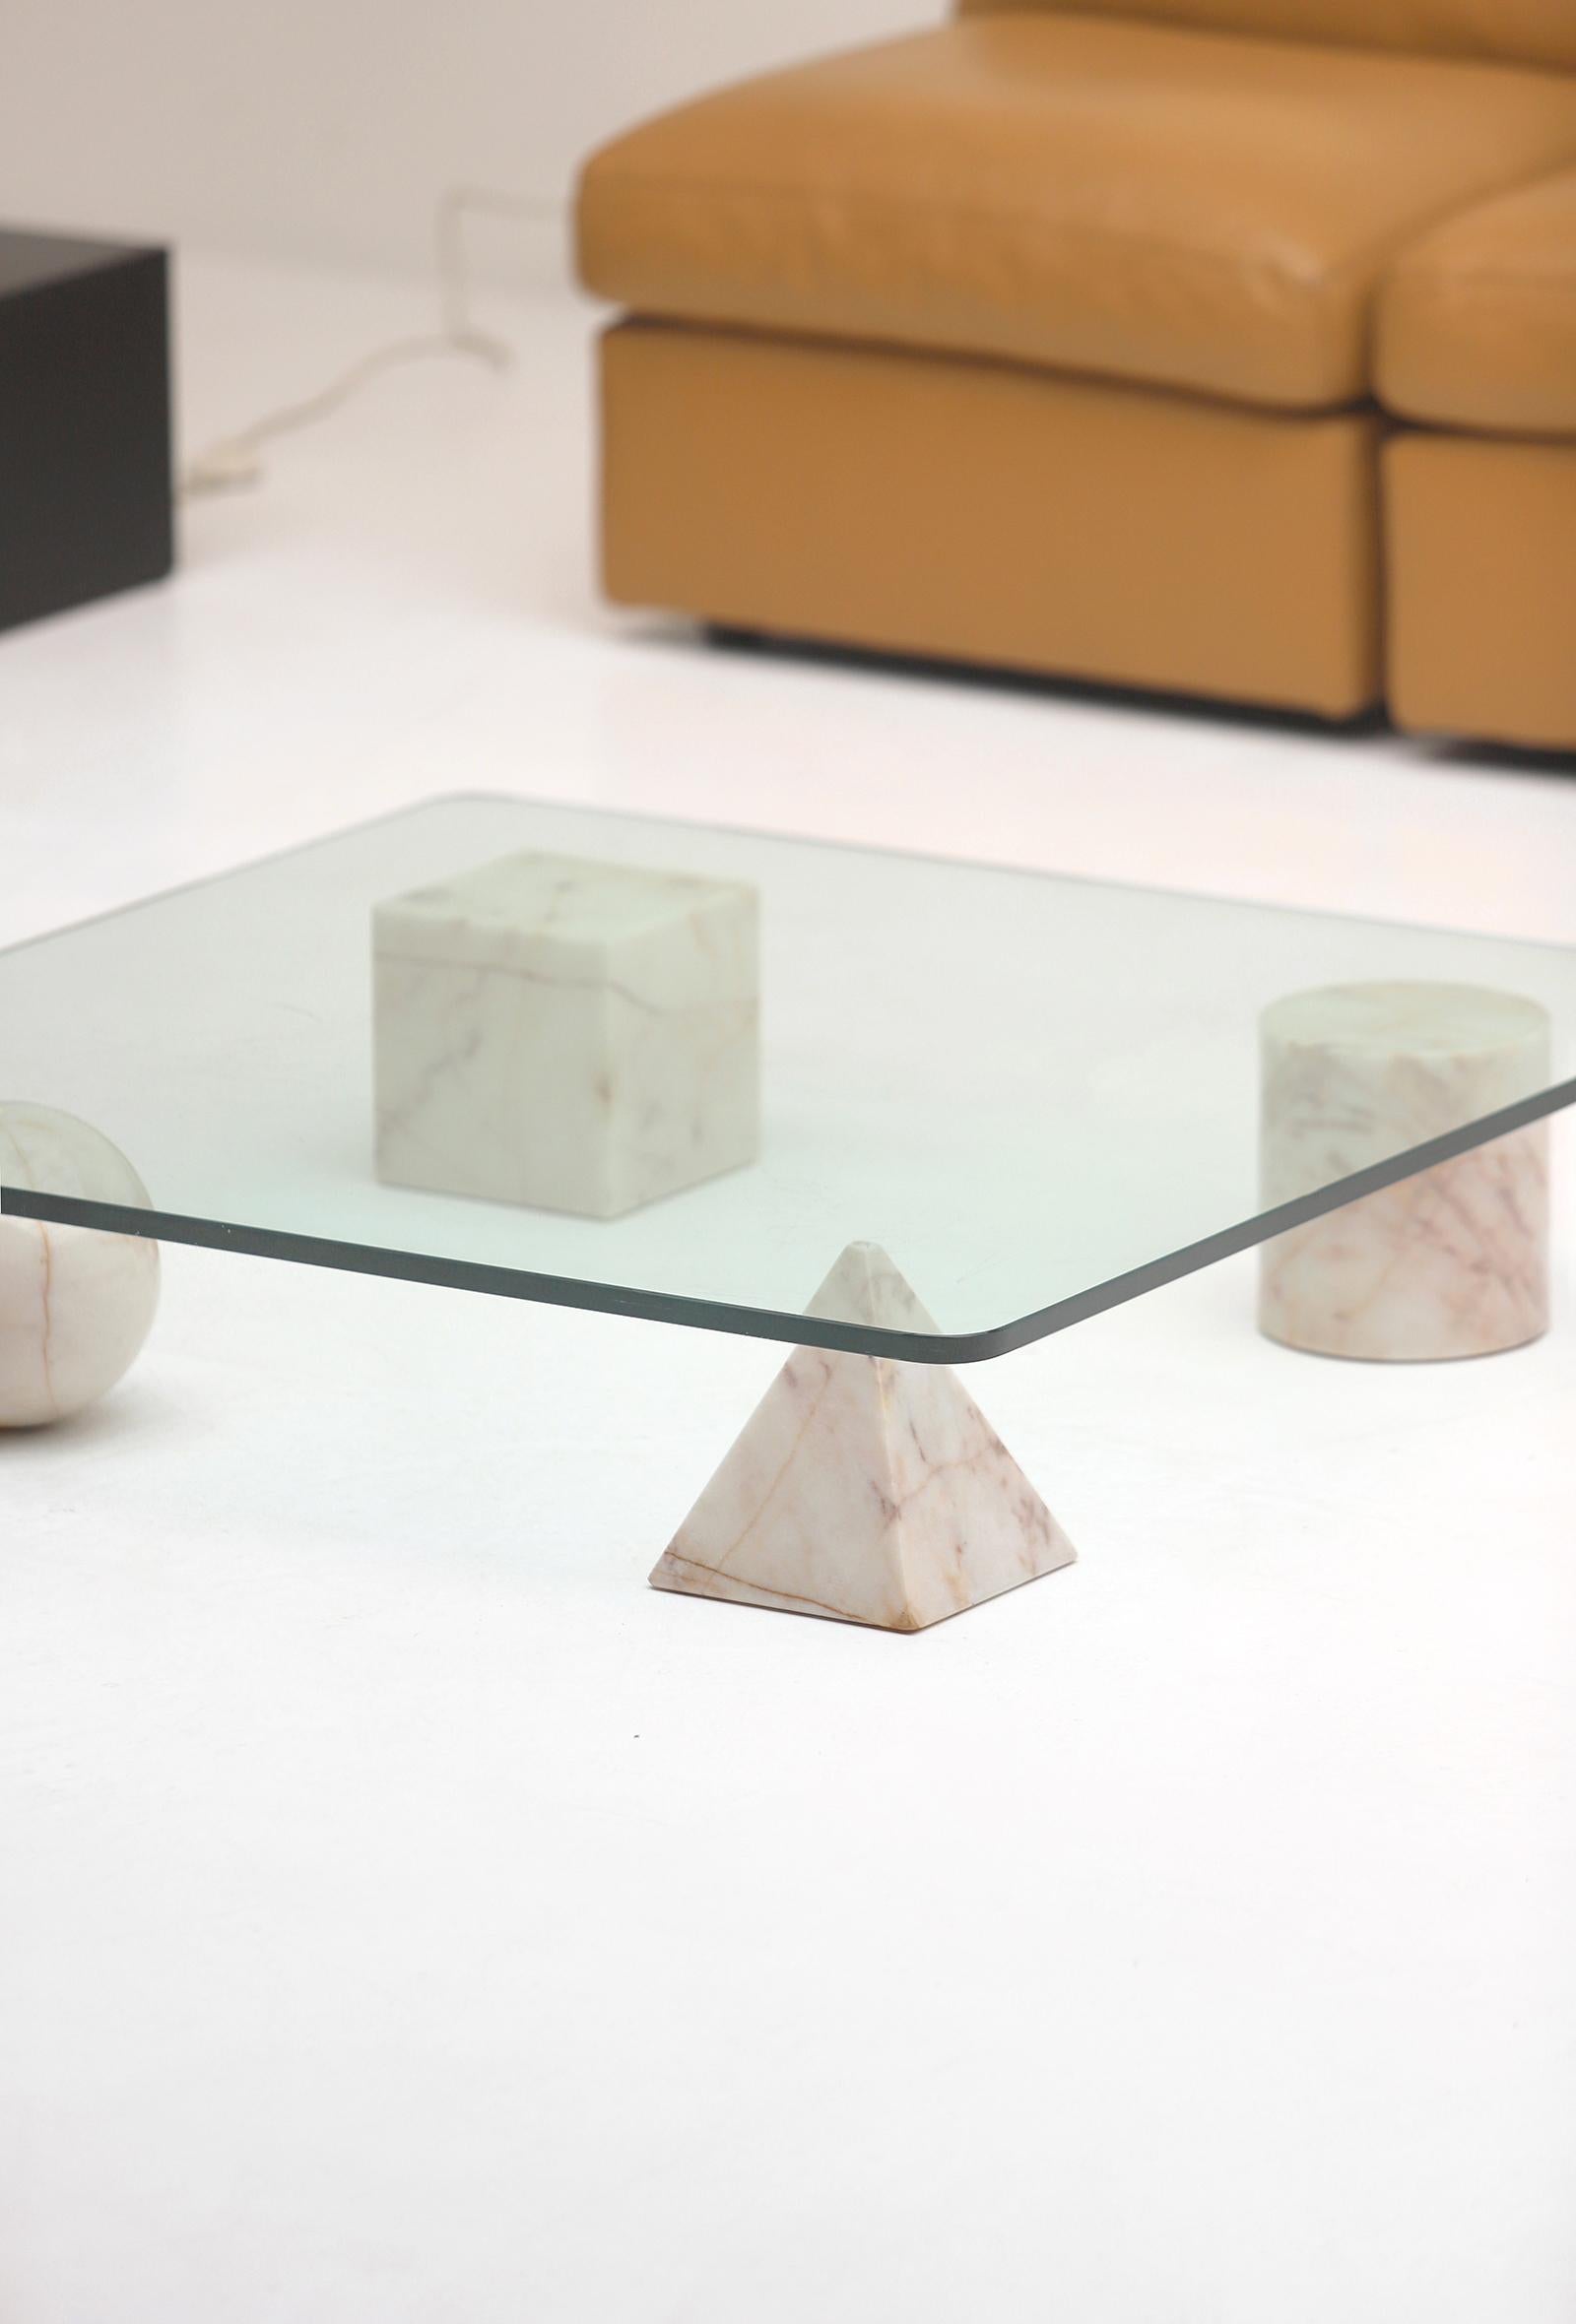 Mid-Century Modern Decorative Coffee Table by Lella and Massimo Vignelli, Designed in the 1970s